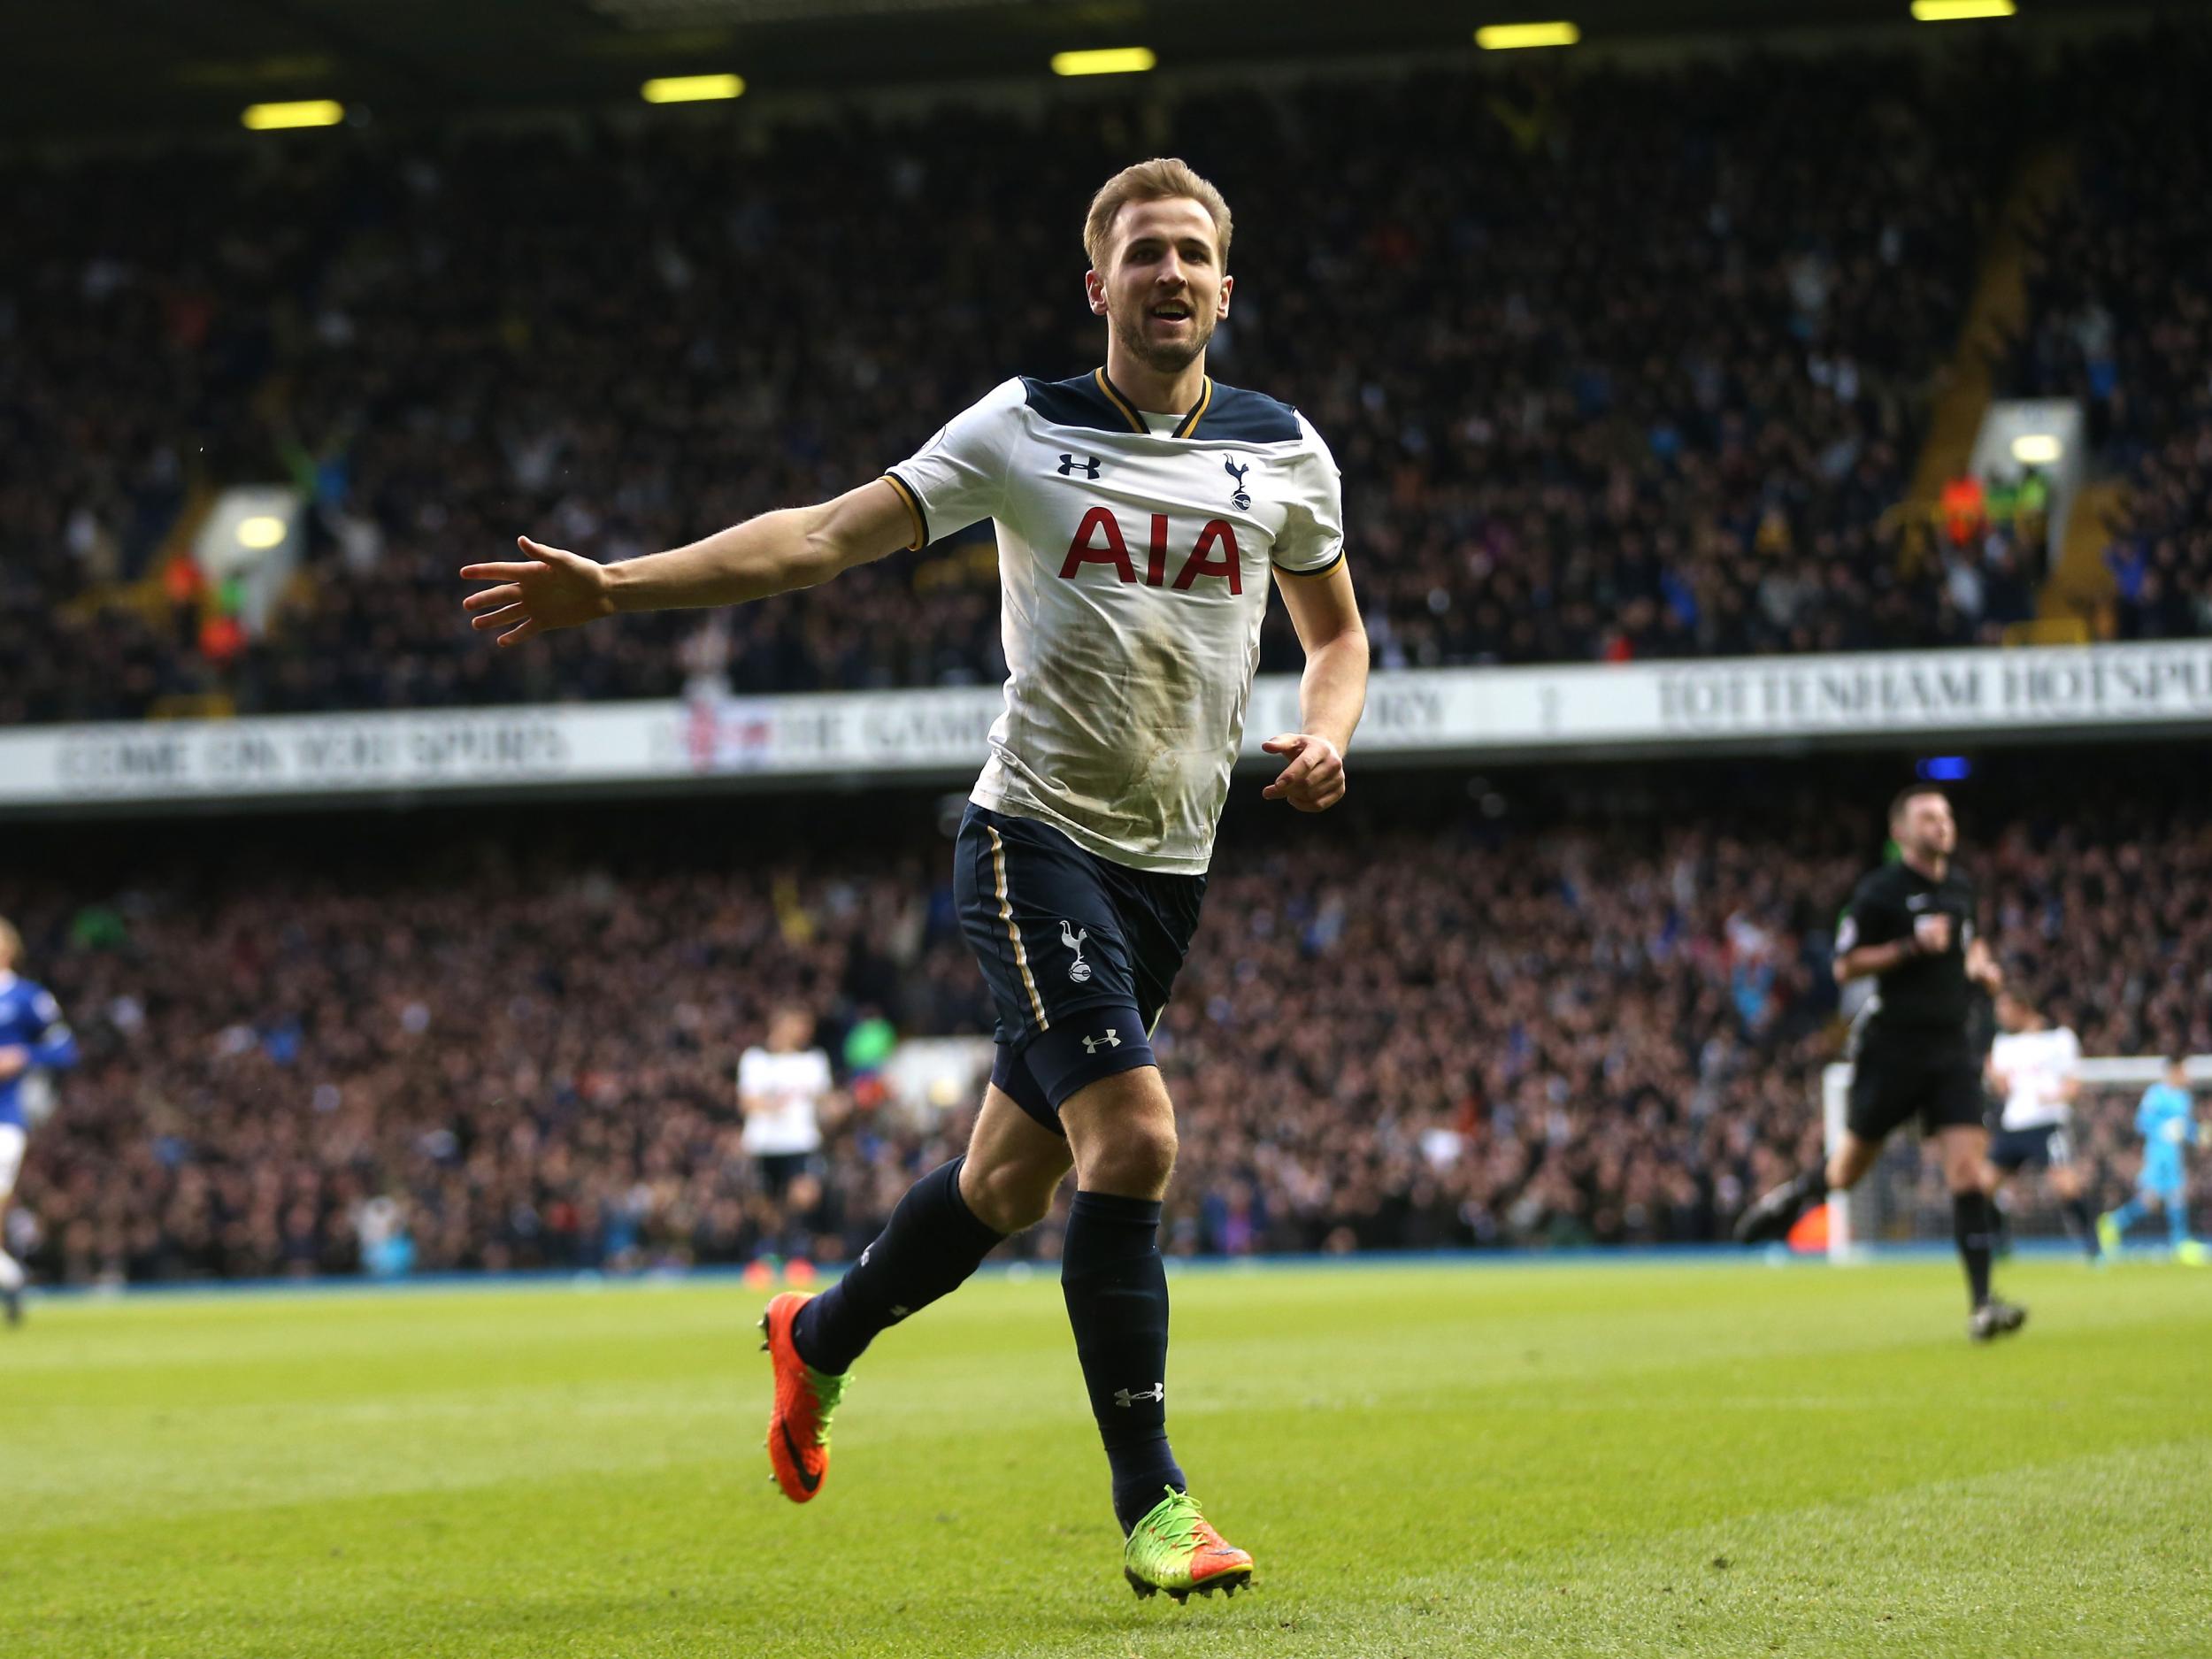 Kane is hitting form at the right time for Tottenham